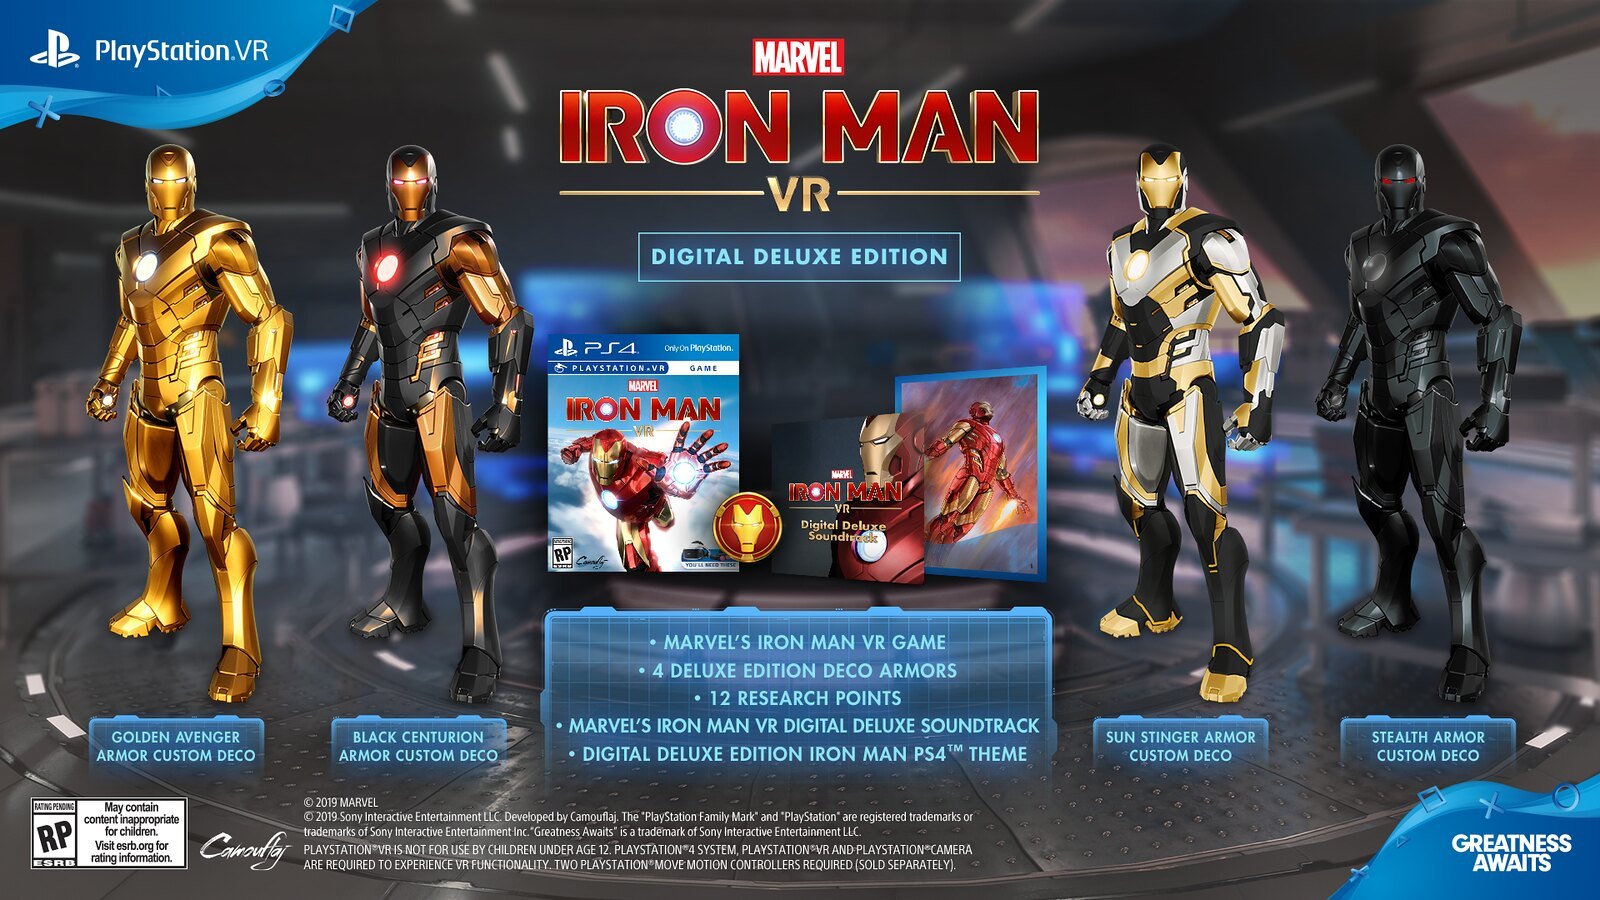 Ie Openly Predictor Iron Man VR: Last Chance For Pre-Order Bonuses, Releases This Friday -  GameSpot